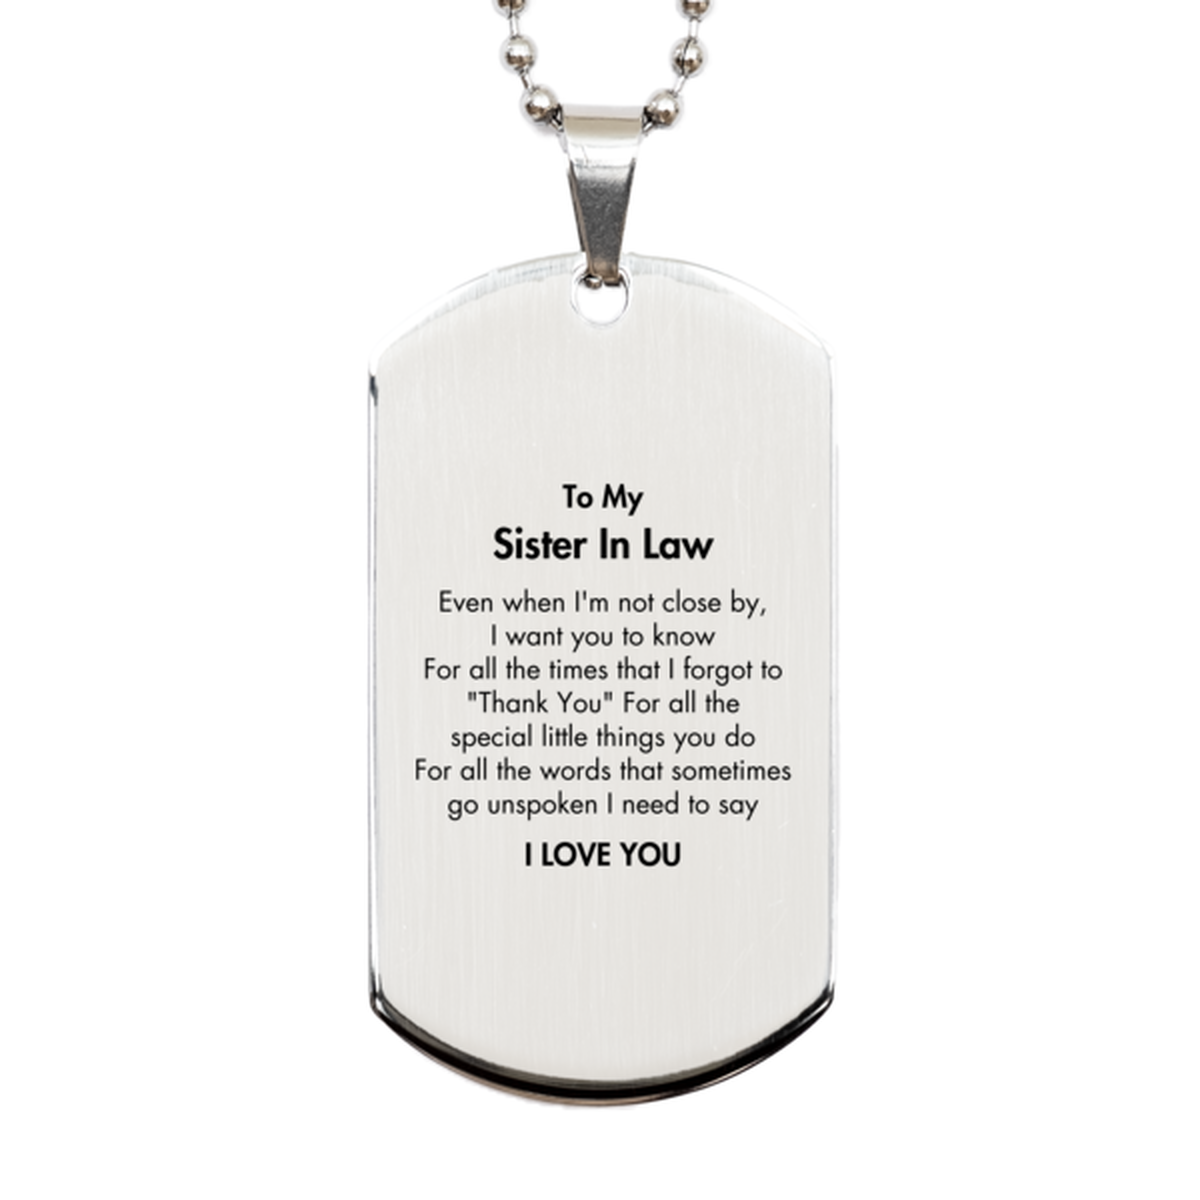 Thank You Gifts for Sister In Law, Keepsake Silver Dog Tag Gifts for Sister In Law Birthday Mother's day Father's Day Sister In Law For all the words That sometimes go unspoken I need to say I LOVE YOU